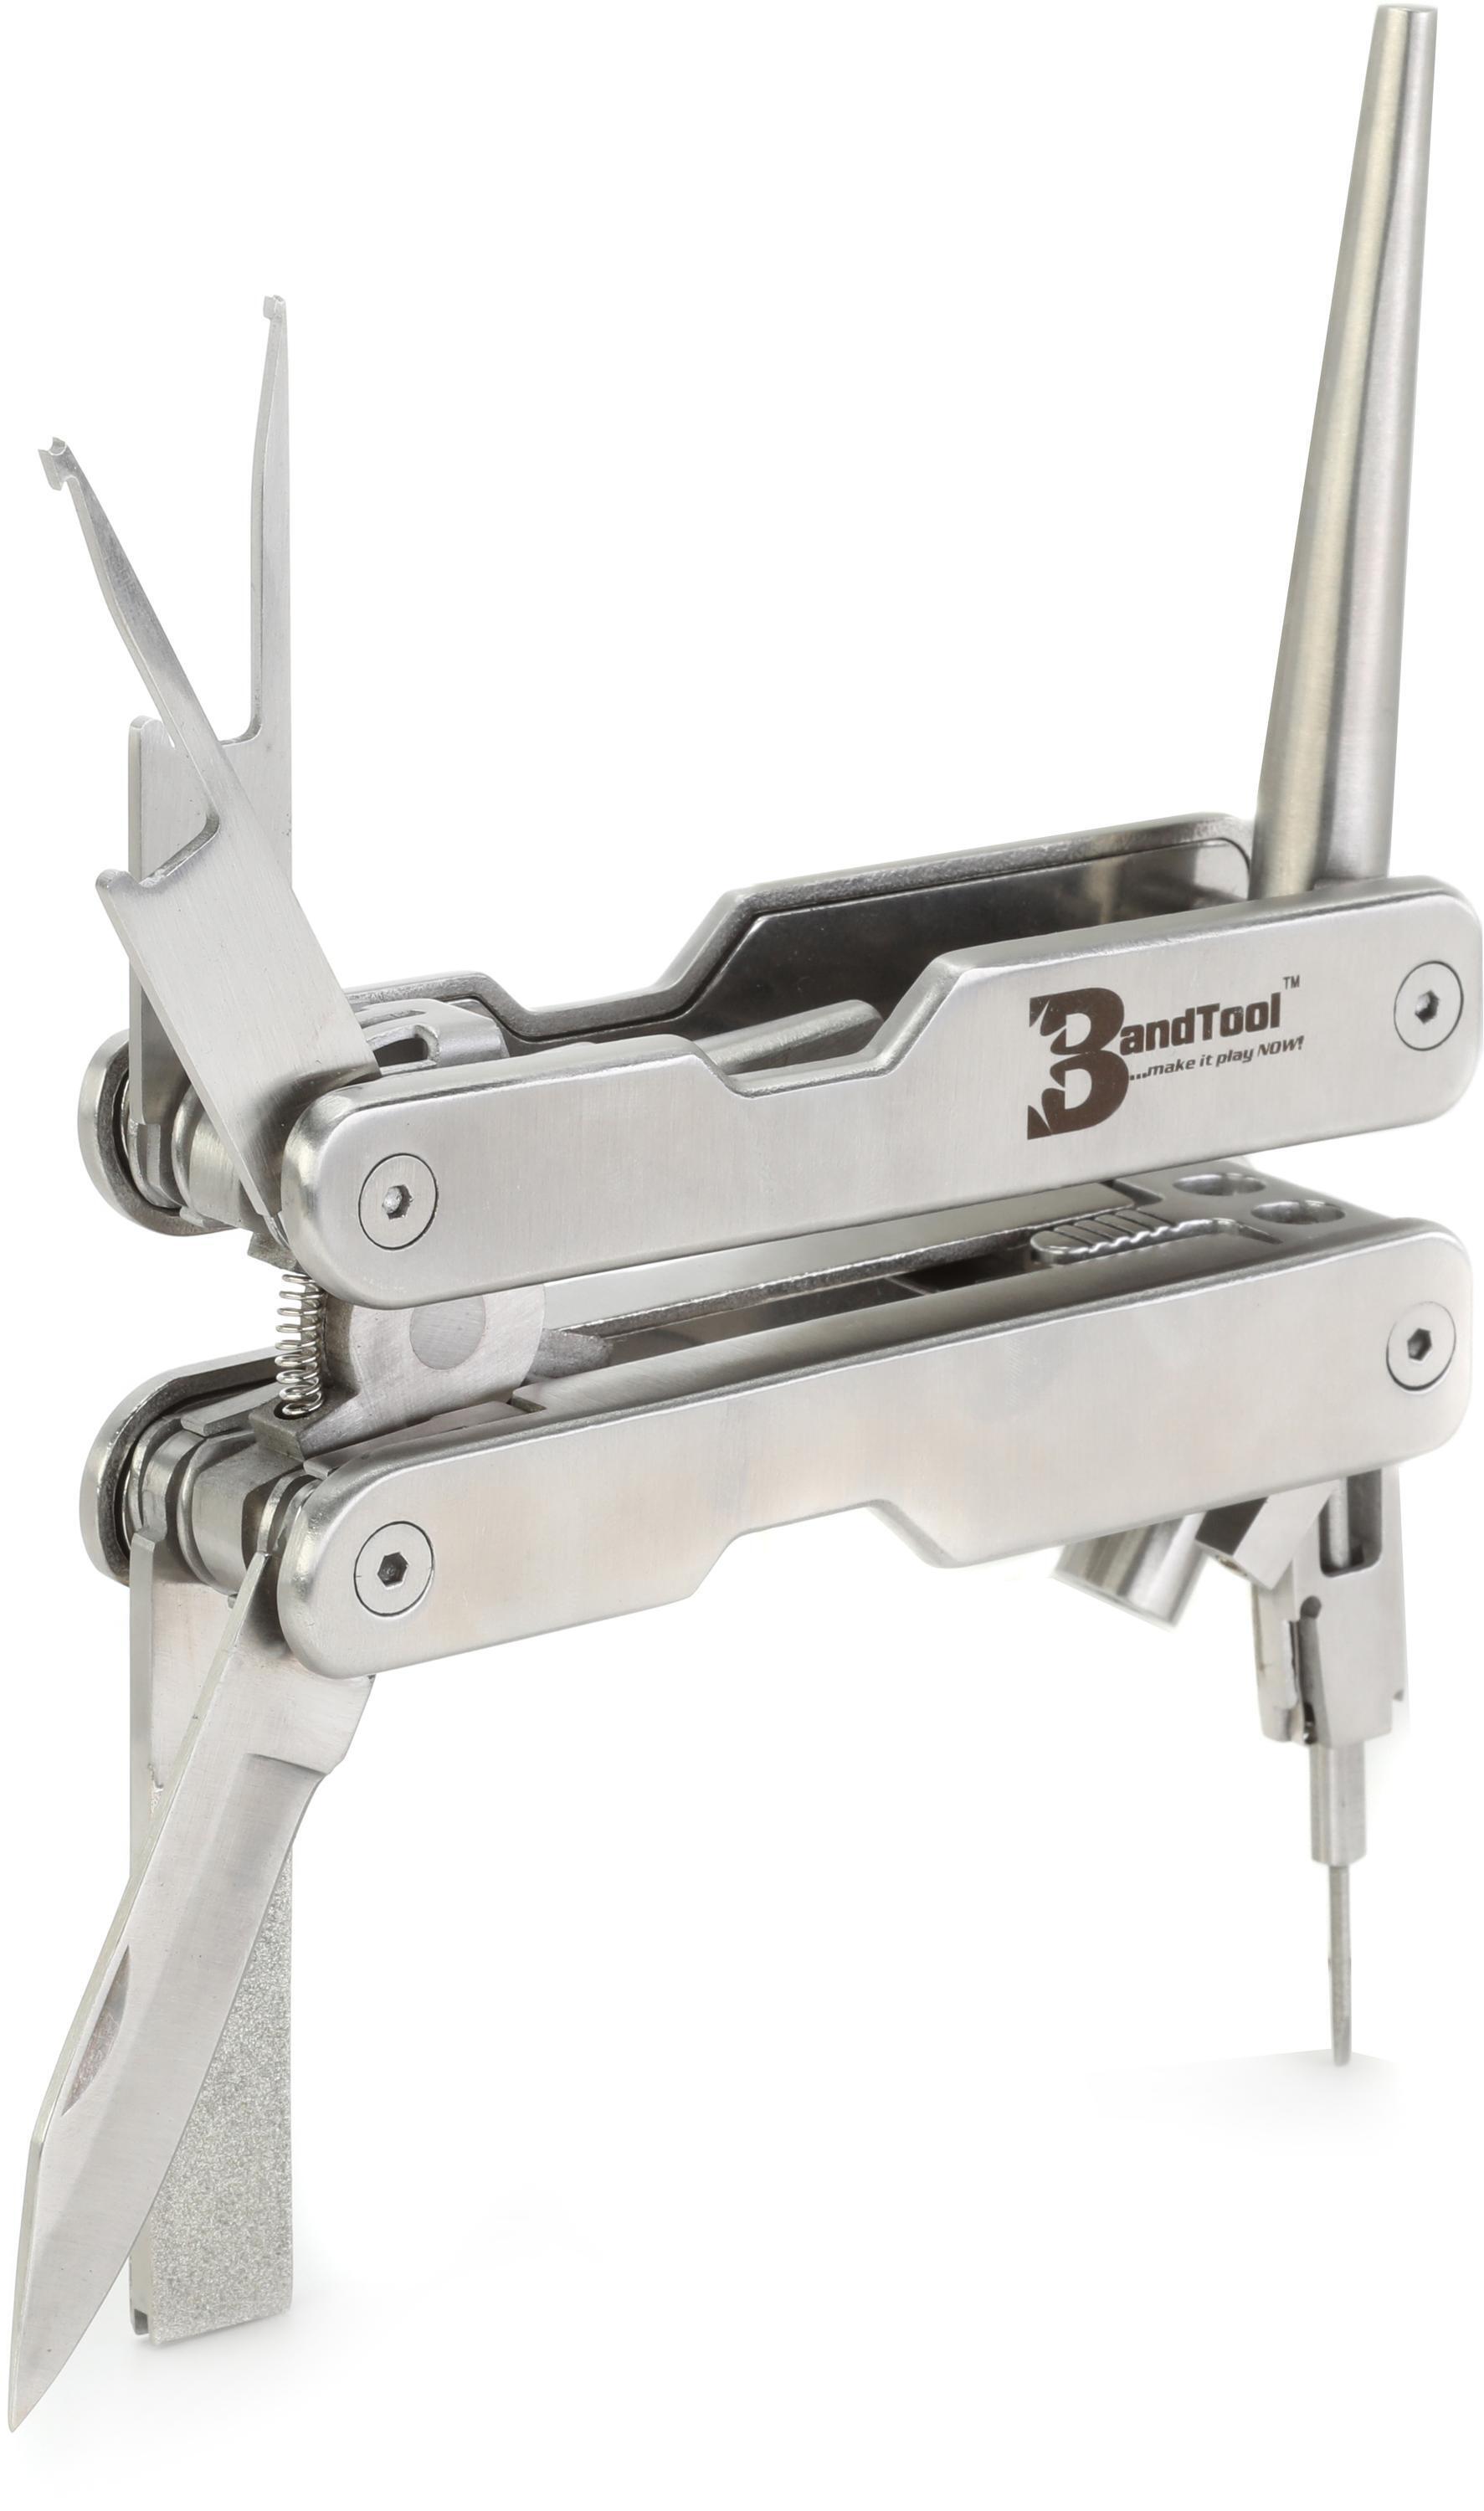 BandTool BT-1 Multi-tool with Blade Sweetwater